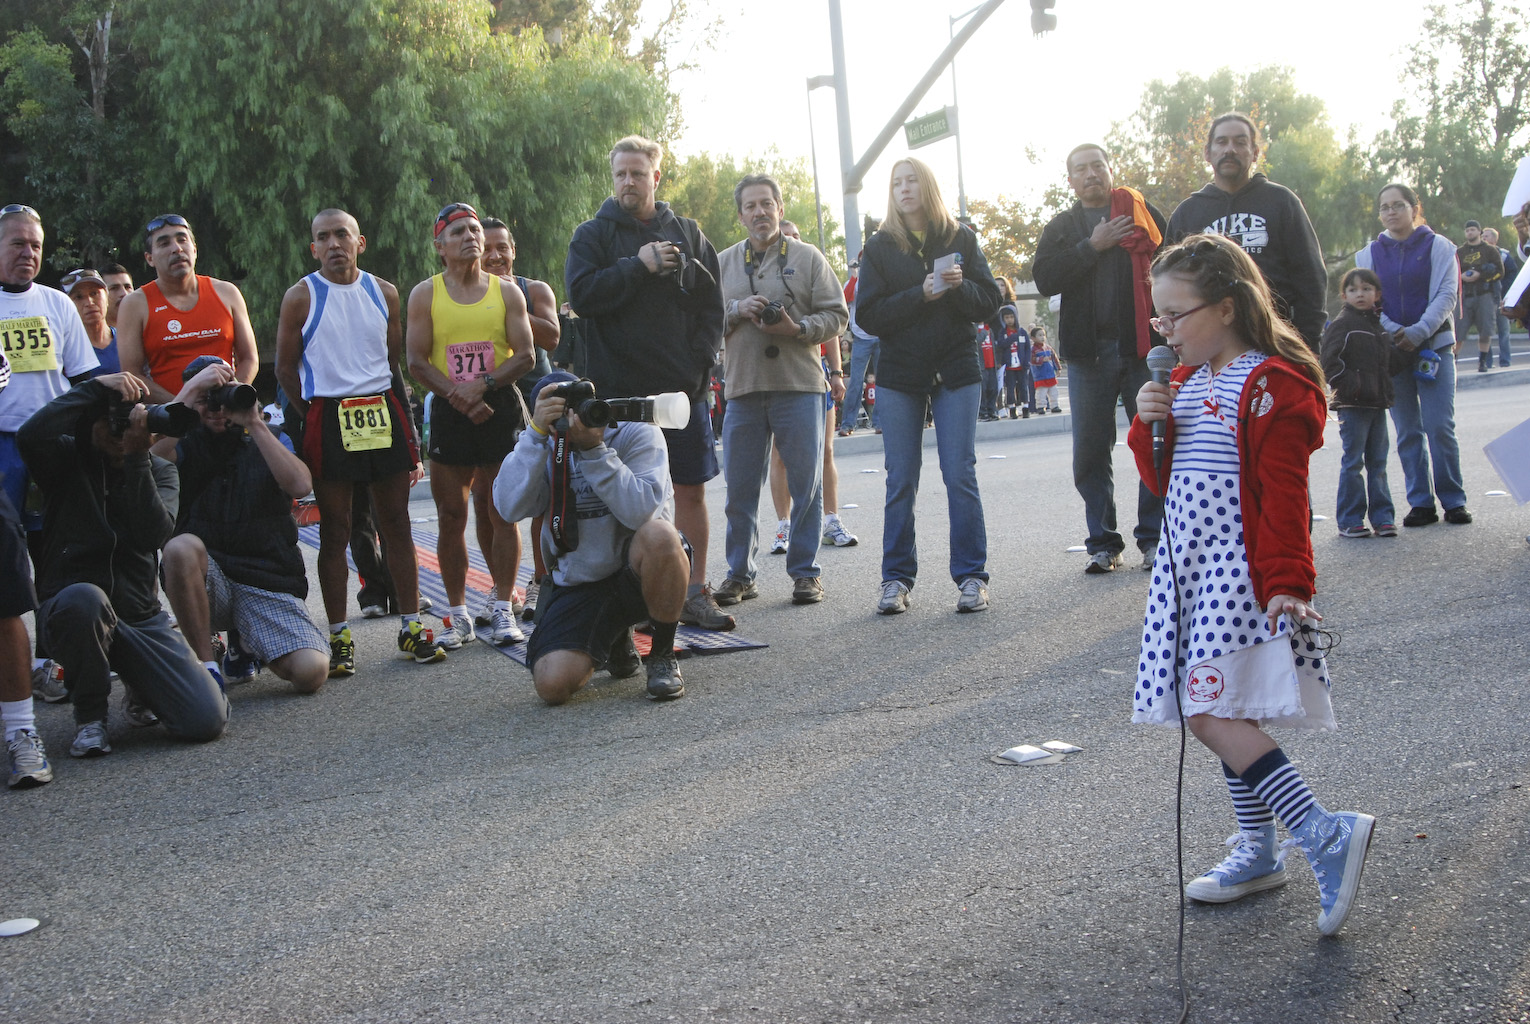 Marlowe sings the National Anthem at the start of the Santa Clarita Marathon, for a 5000+ crowd!